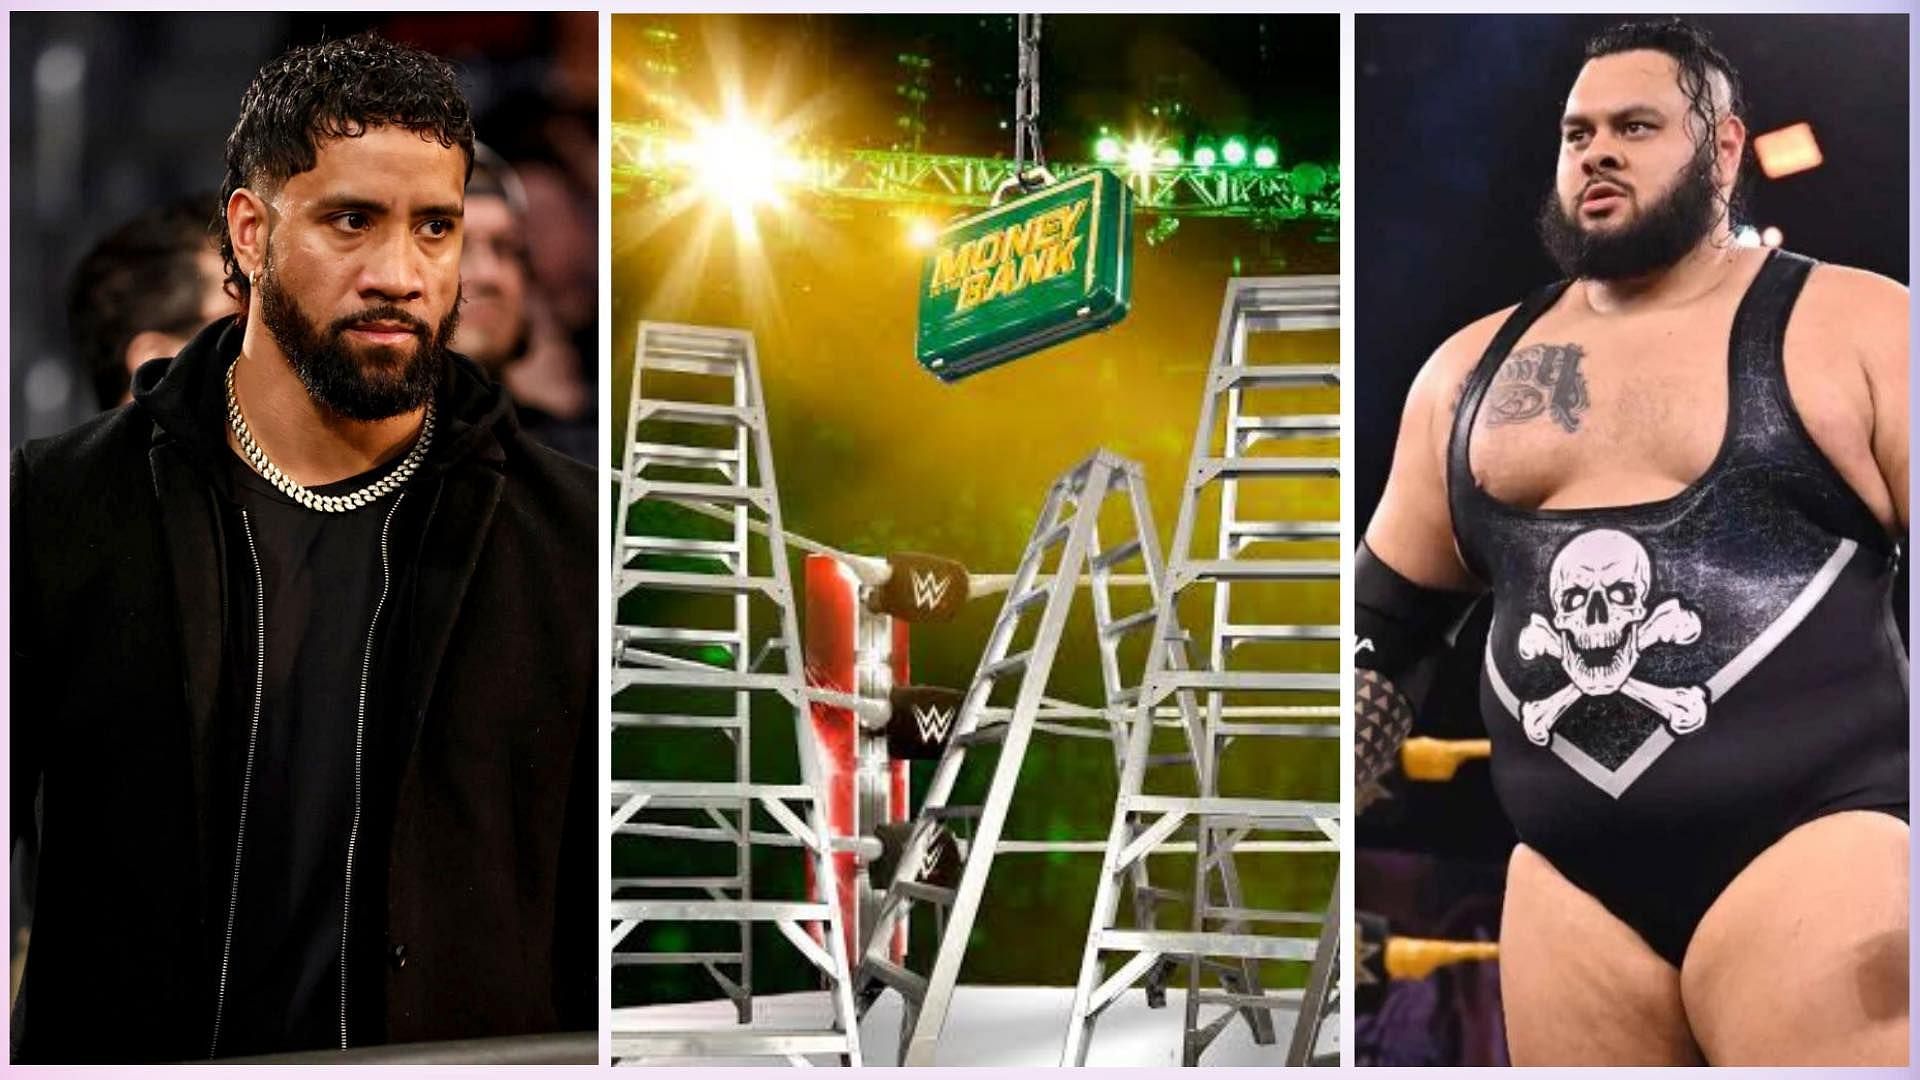 Several interesting WWE stars could win the Money in the Bank briefcase this year